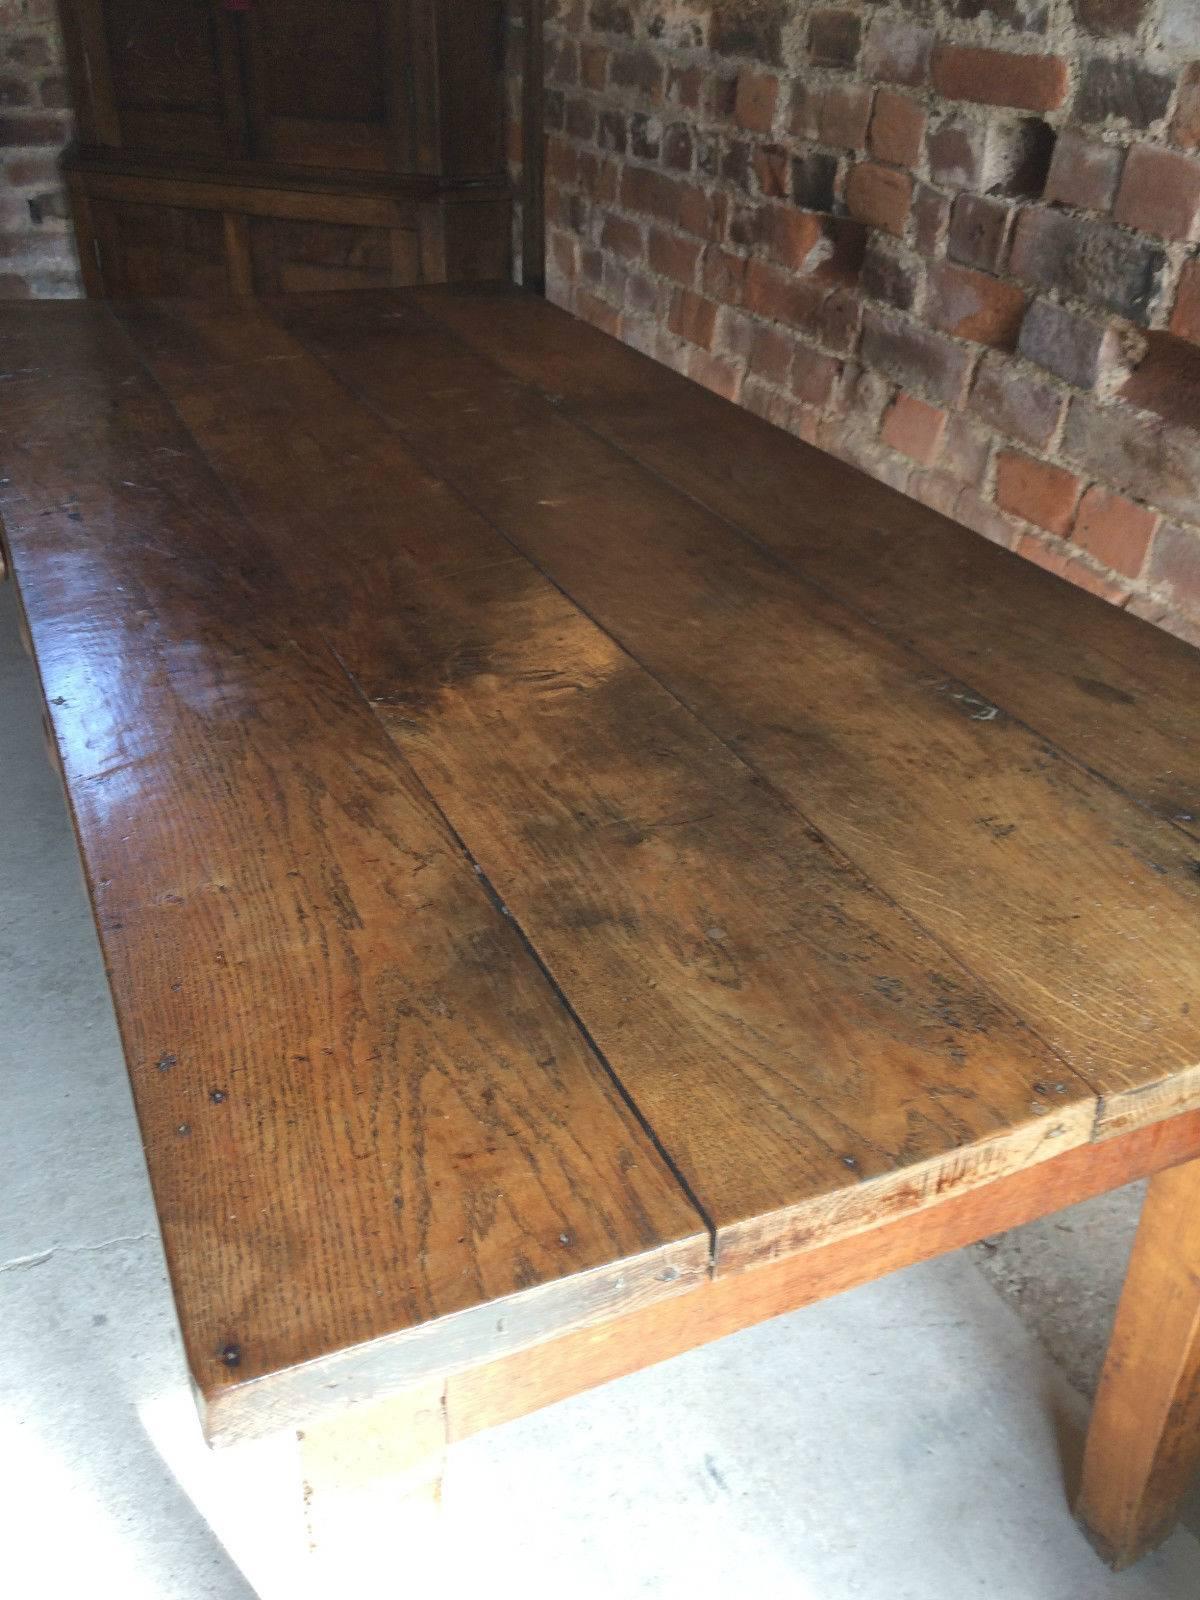 English Antique Dining Table, Solid Oak, Victorian 19th Century Kitchen Rustic 